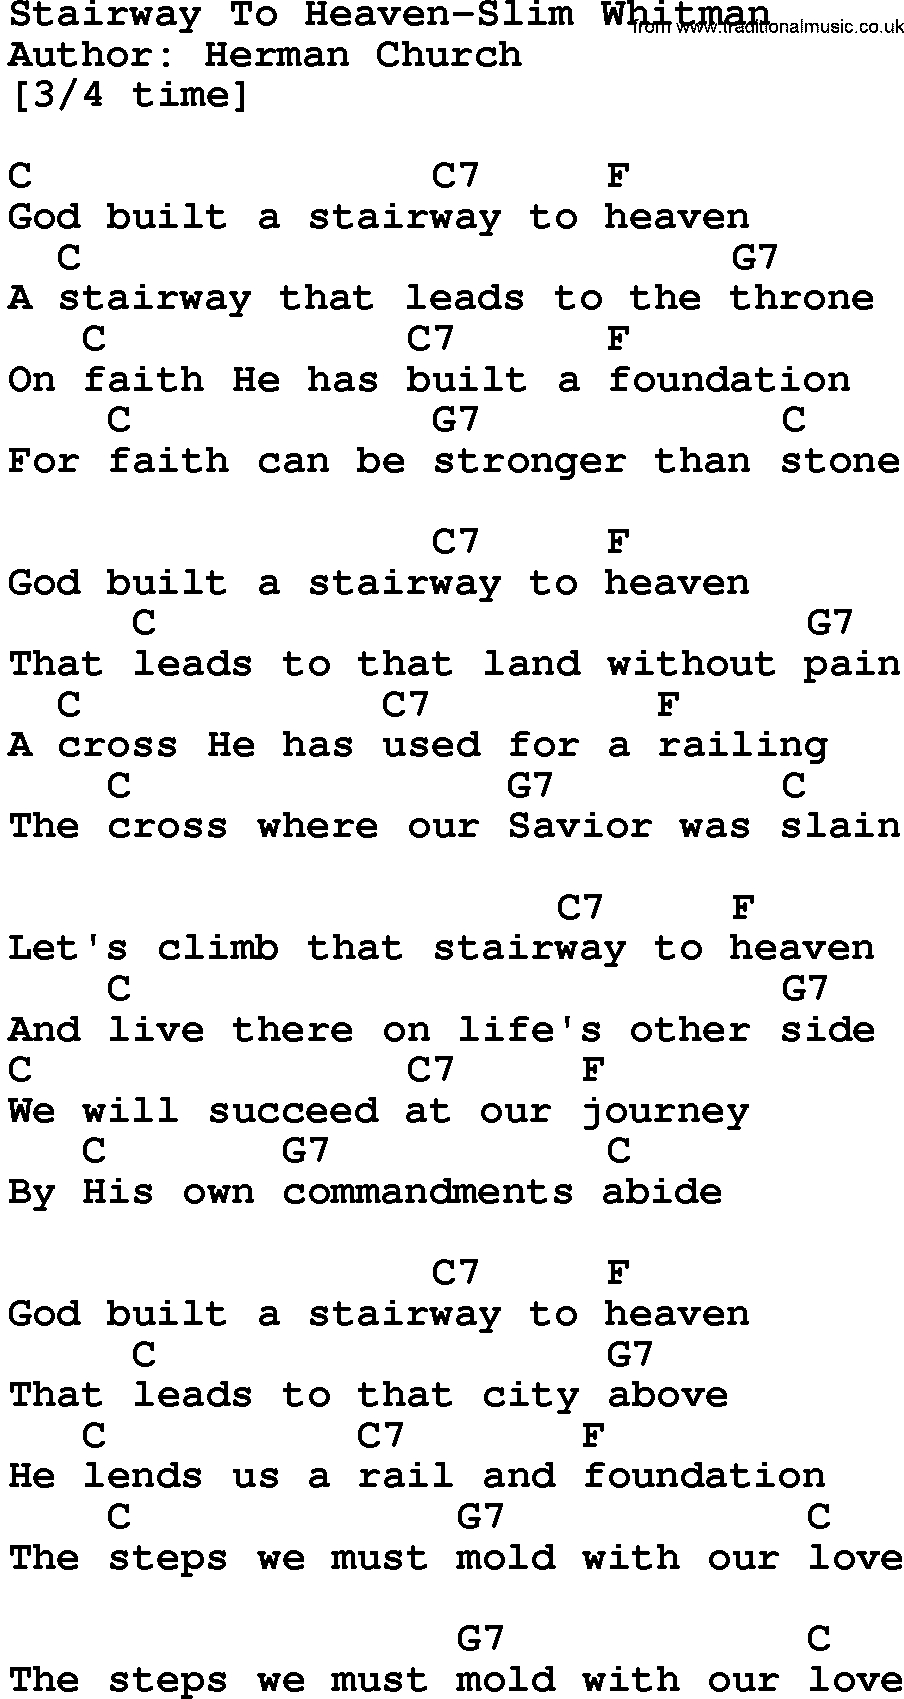 Stairway To Heaven Chords Country Musicstairway To Heaven Slim Whitman Lyrics And Chords